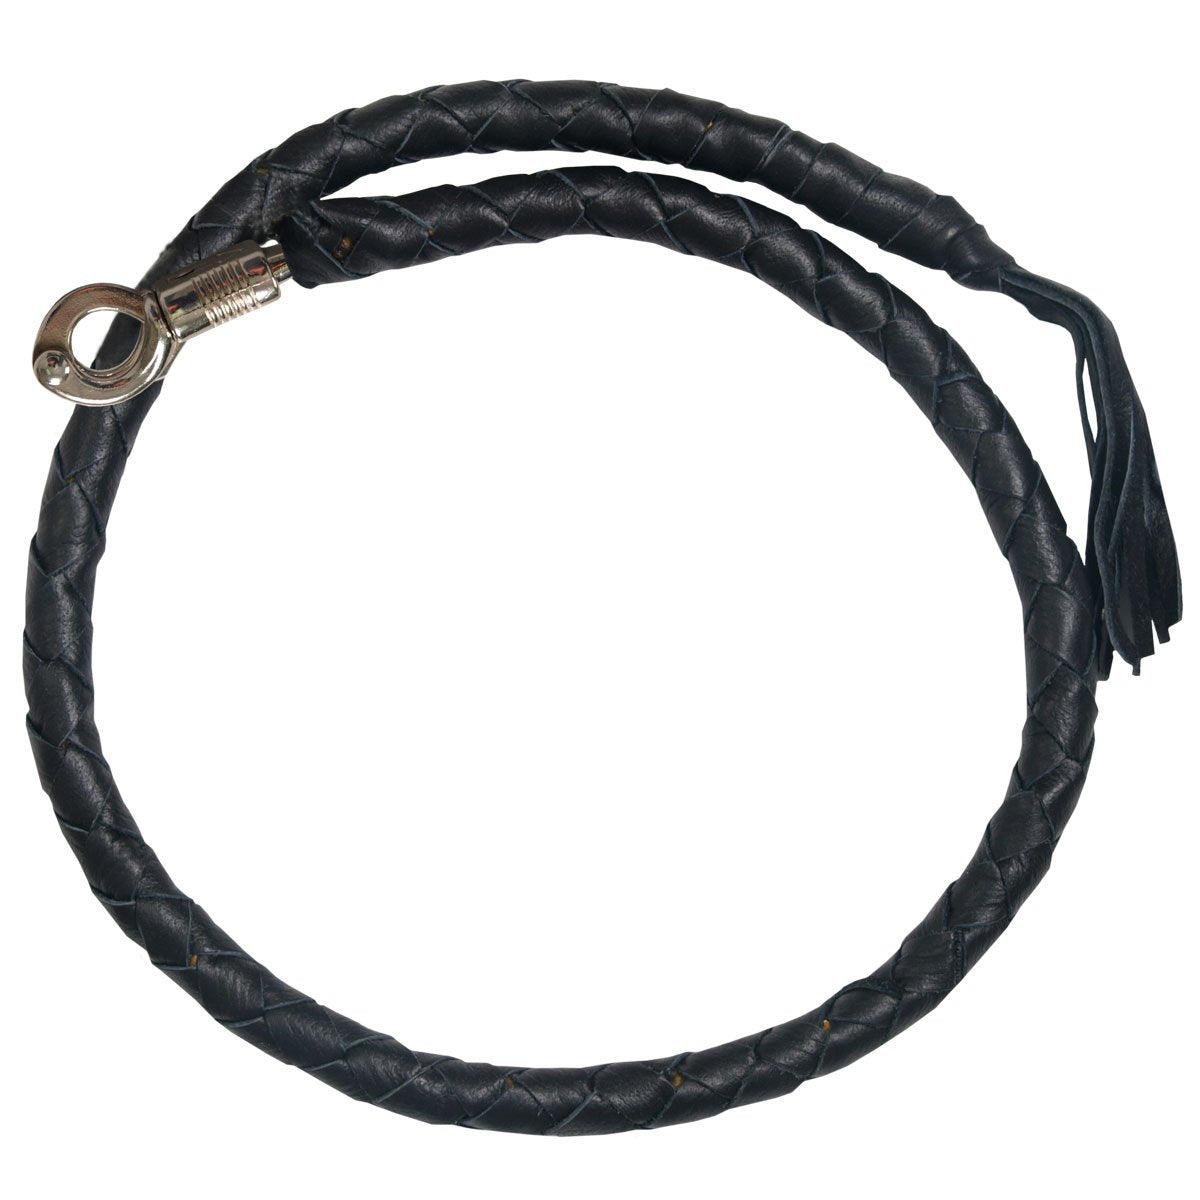 Hot Leathers "Get Back" Genuine Leather Whip - American Legend Rider